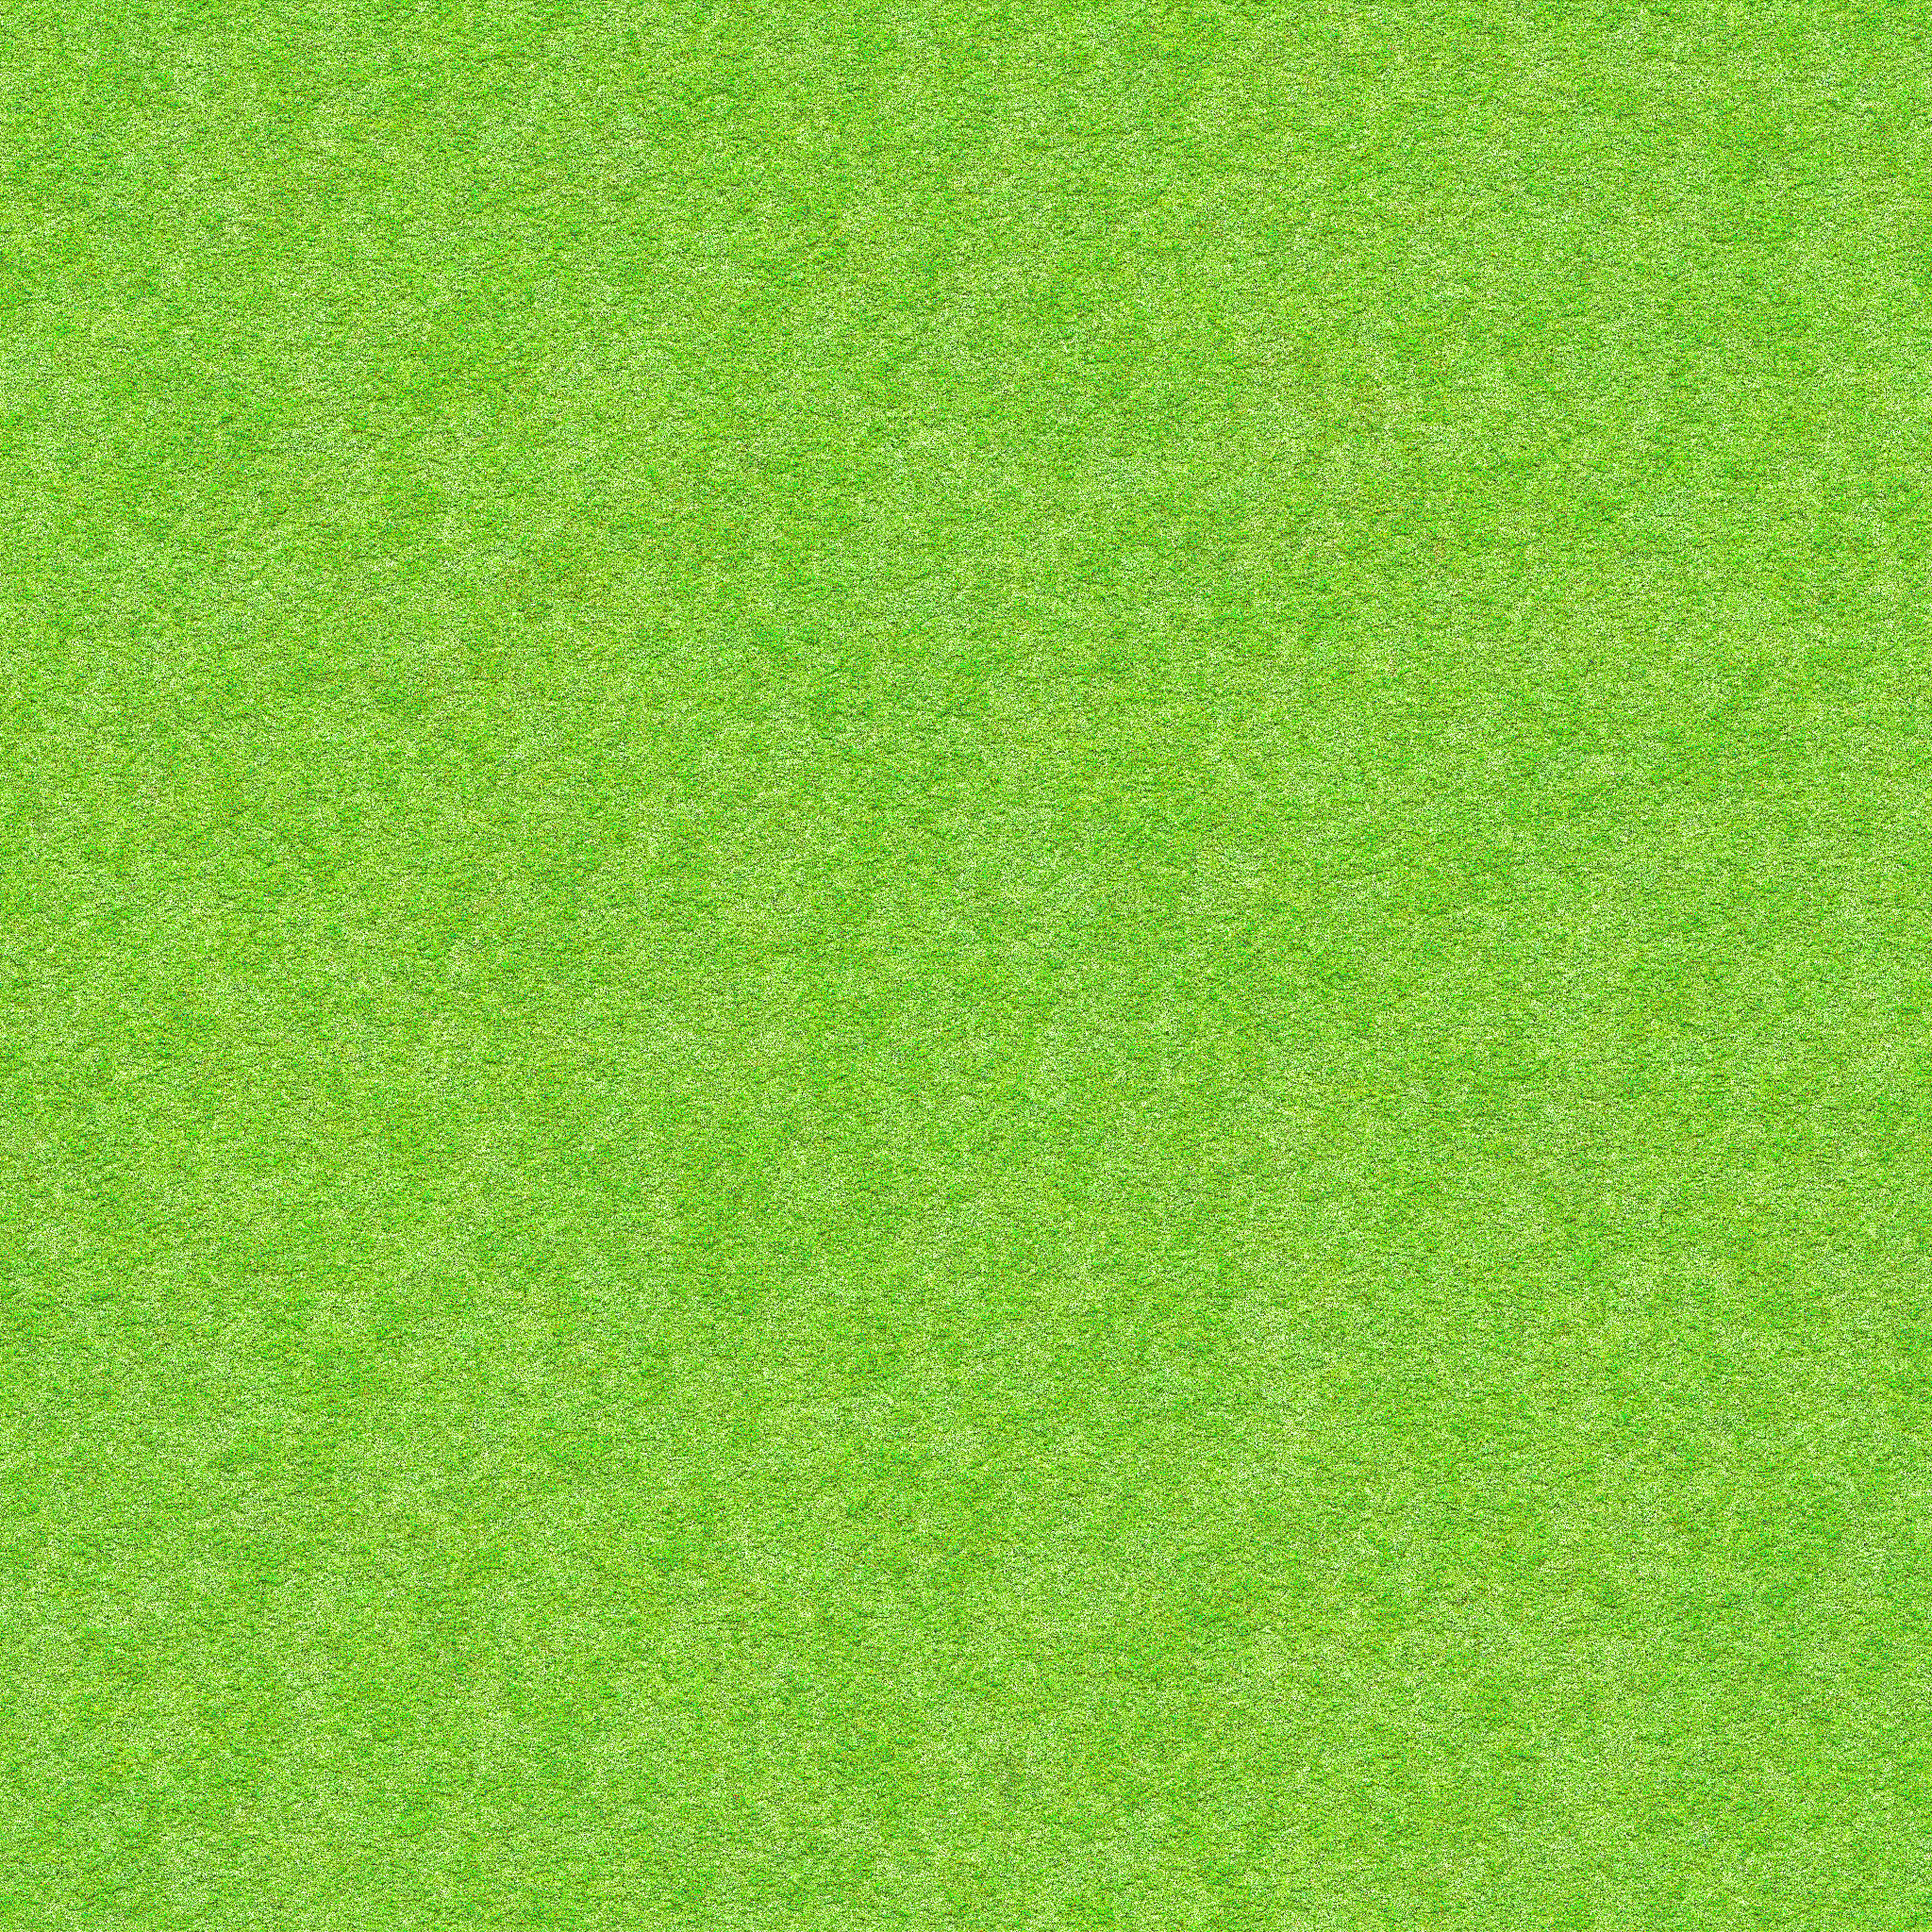 High Resolution Grass Texture | Free Images on all3dfree